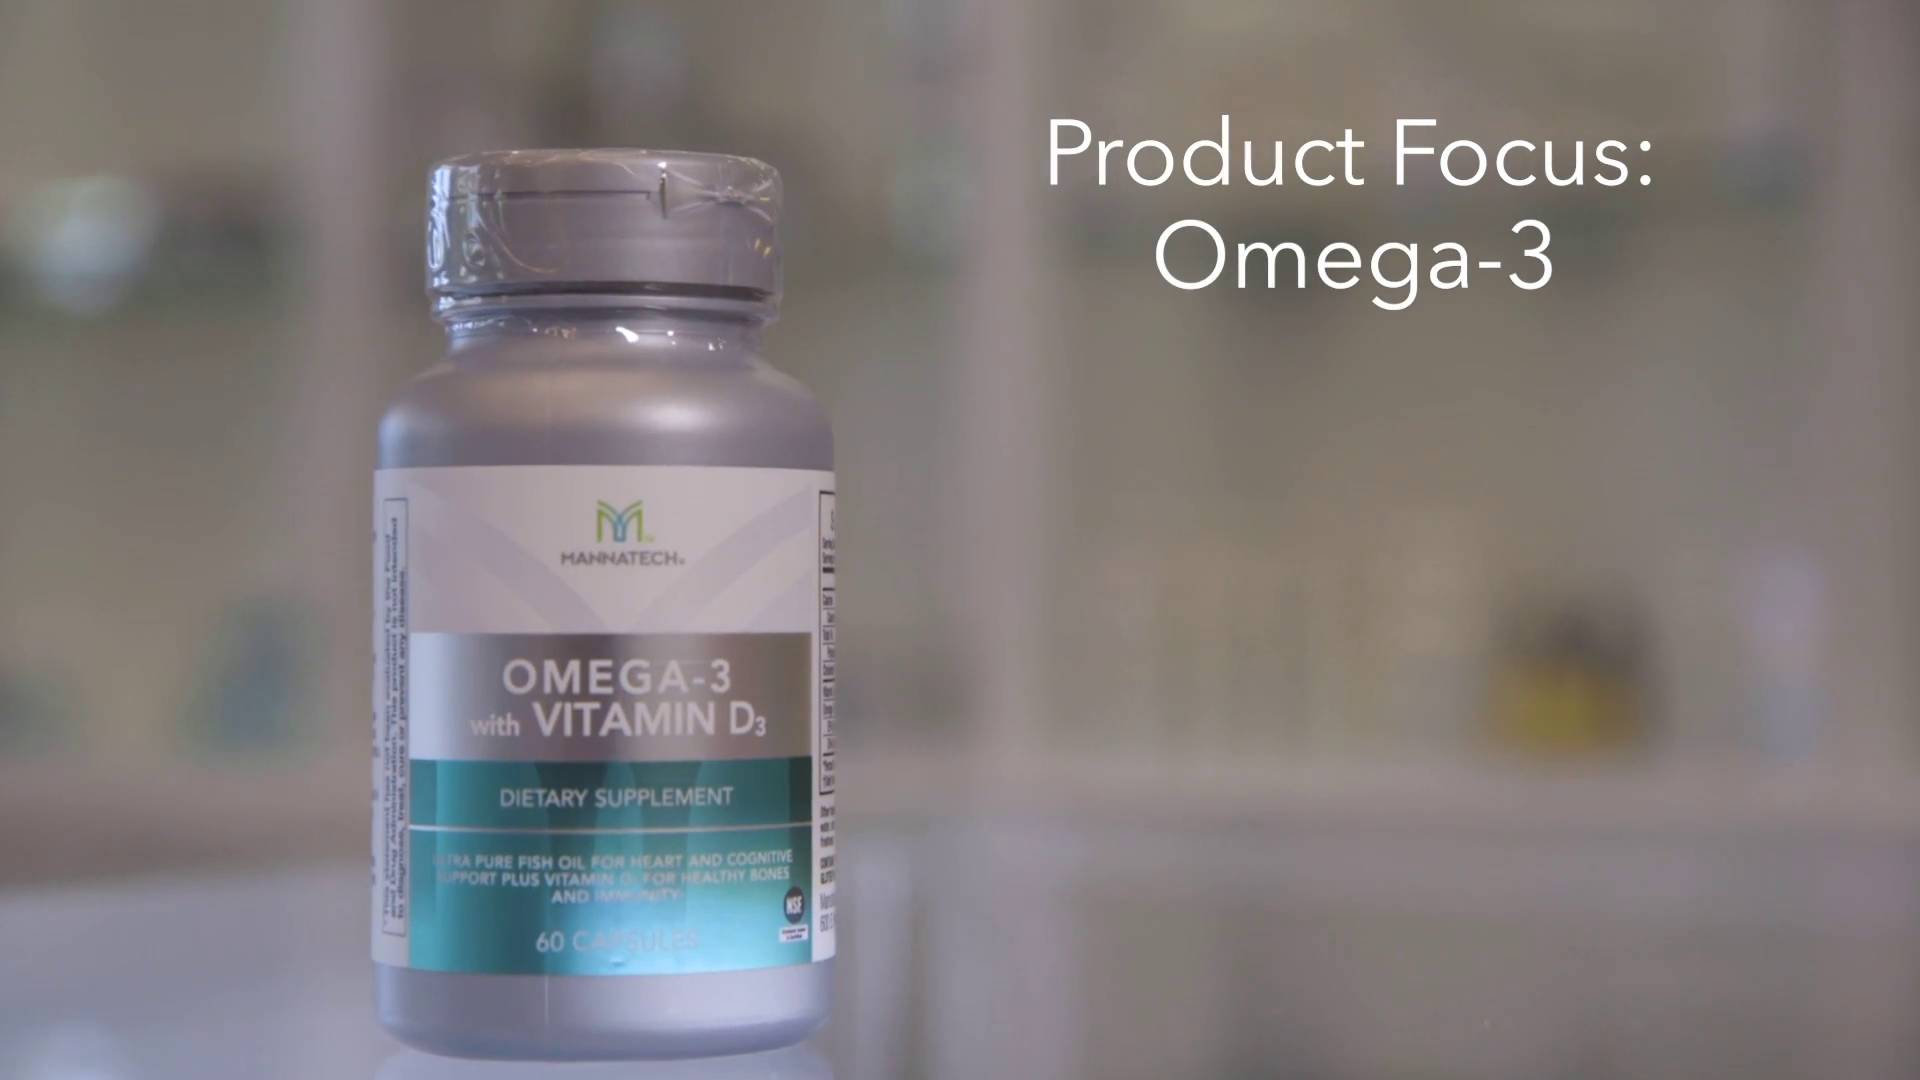 Omega-3 with Vitamin D3: Product Focus 2018